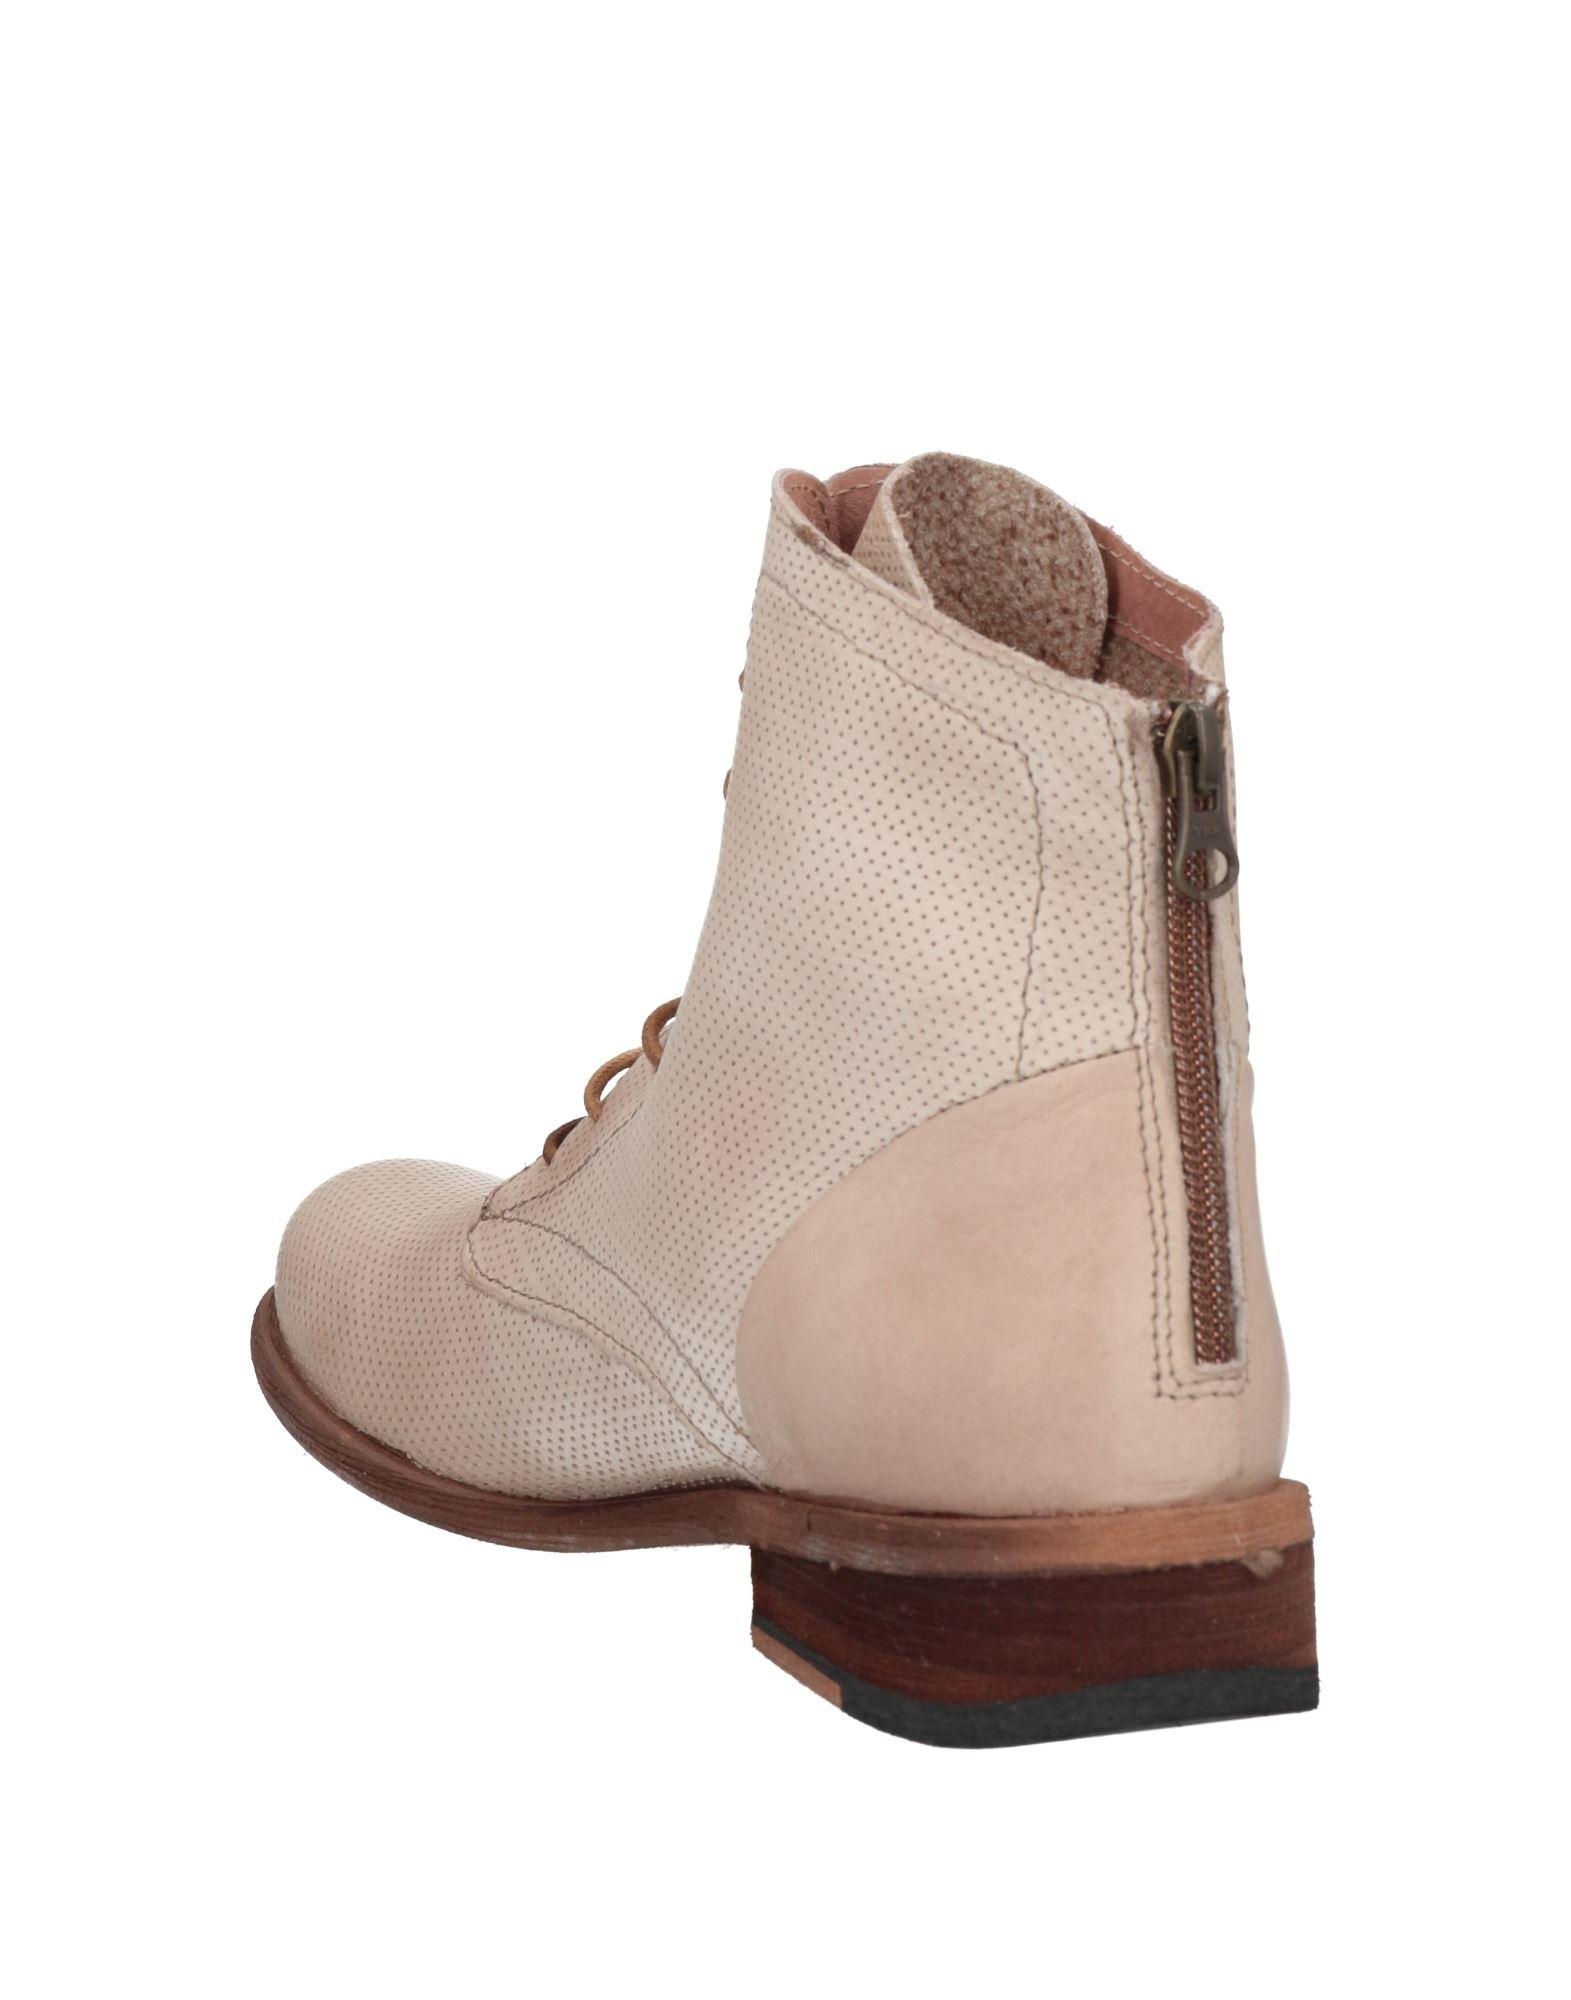 Felmini Ankle Boots in Natural | Lyst